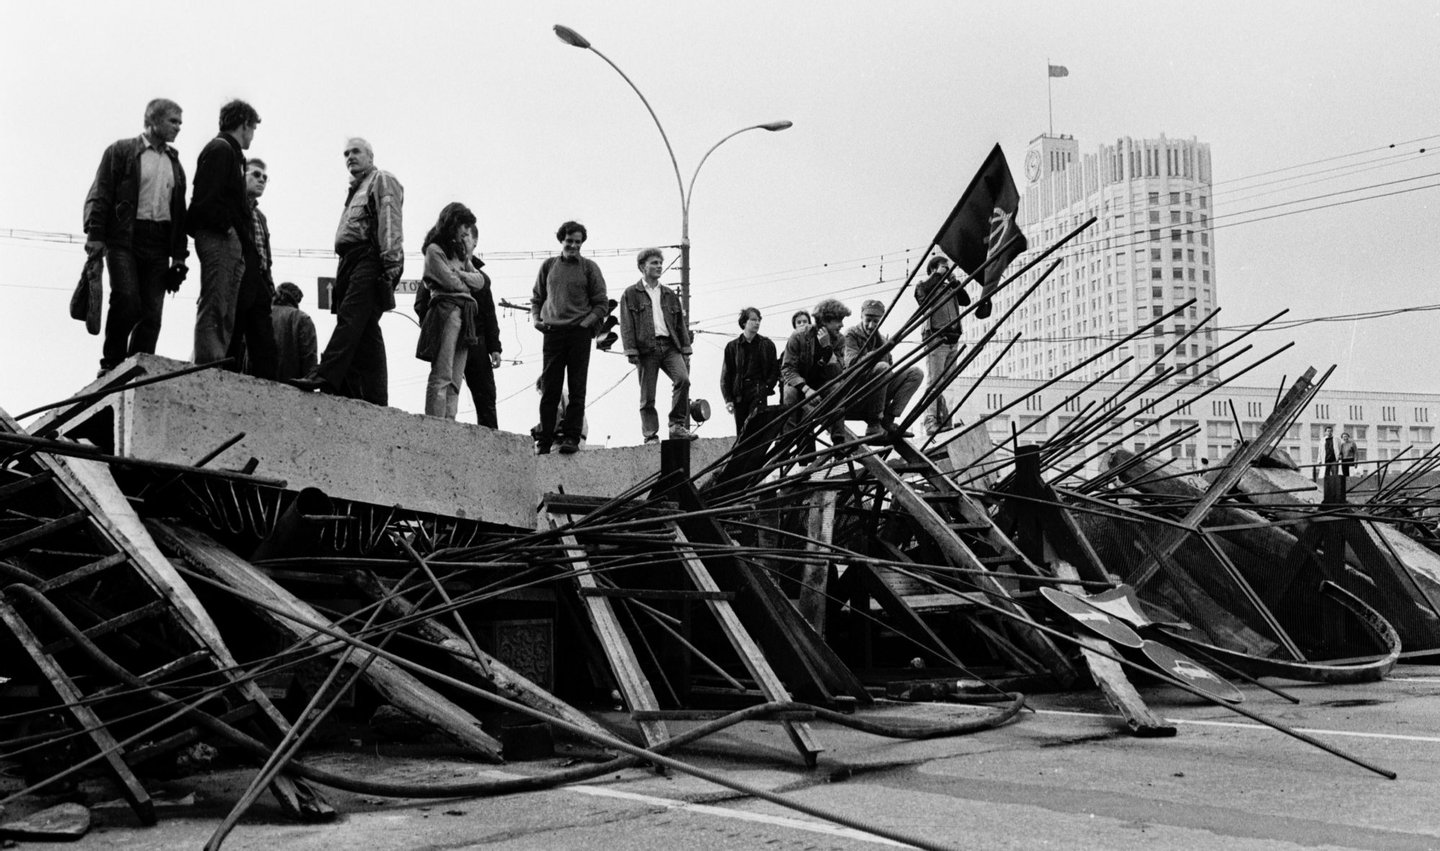 People stand on a barricade in front the Russian White House in Moscow on August 21, 1991. Russia marks on August 19-22, 2011, the 20th anniversary of the abortive 1991 coup against then Soviet president Mikhail Gorbachev. Tanks rolled through Moscow towards the Russian White House, where Boris Yeltsin, leader of the Soviet-era Russian republic at the time, gathered his supporters after denouncing the coup from the roof of a tank, which resulted later in the collapse of the Soviet empire.   AFP PHOTO/ ALEXANDER NEMENOV        (Photo credit should read ALEXANDER NEMENOV/AFP/Getty Images)